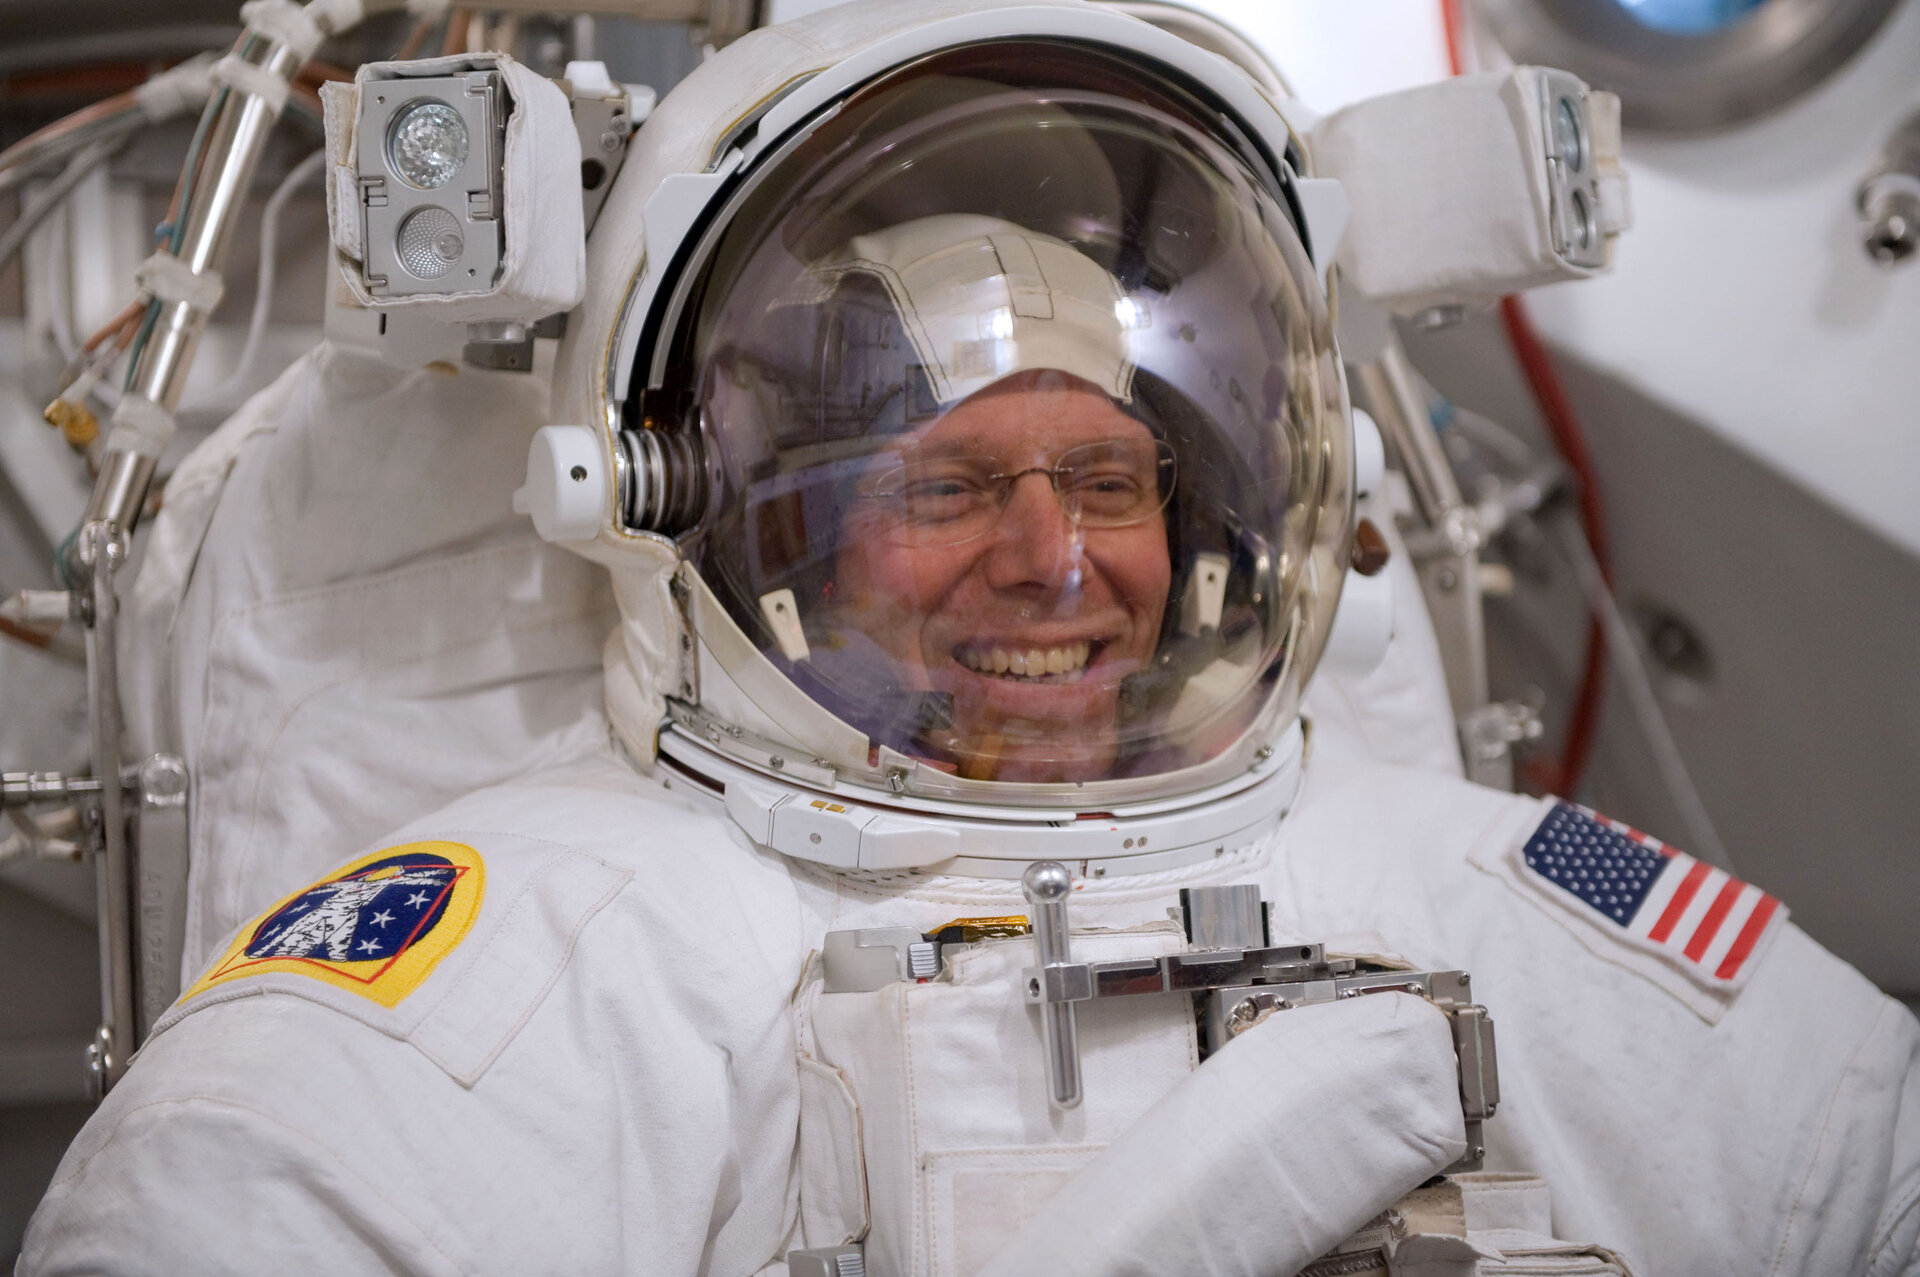 This will be Christer Fuglesang's fourth spacewalk